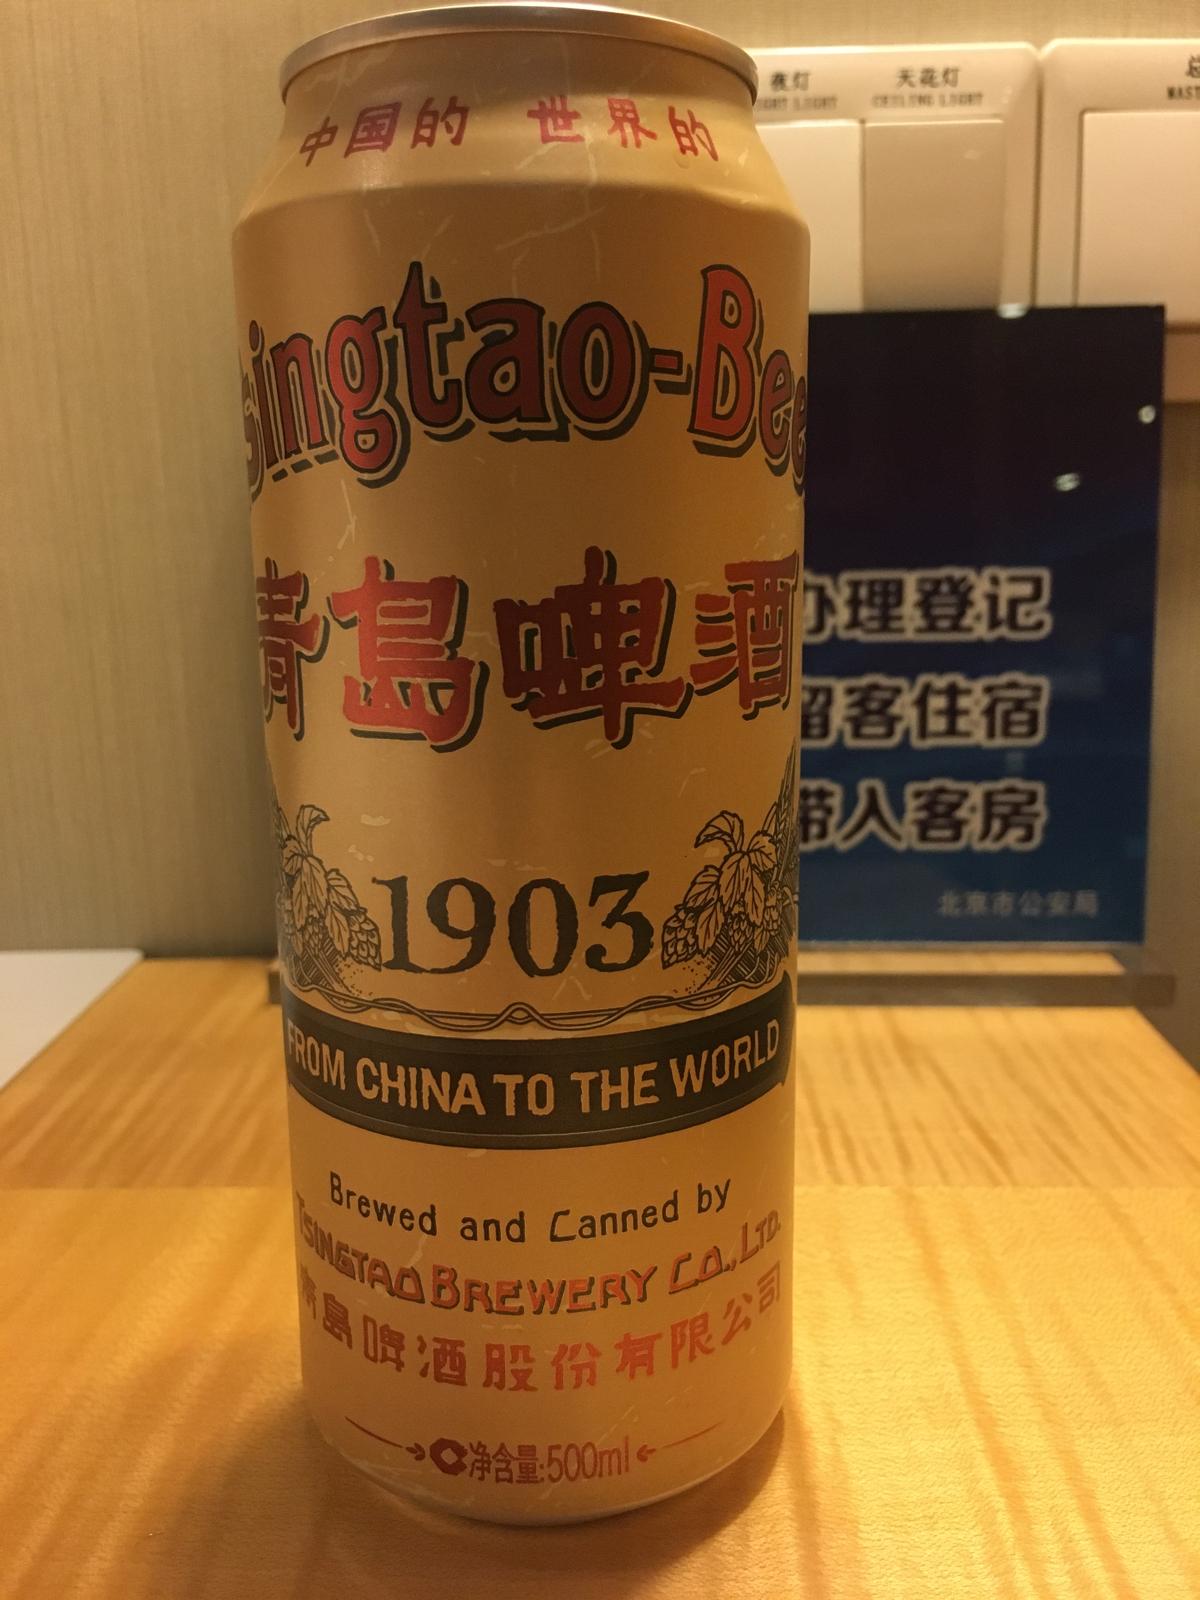 1903 From China to the World